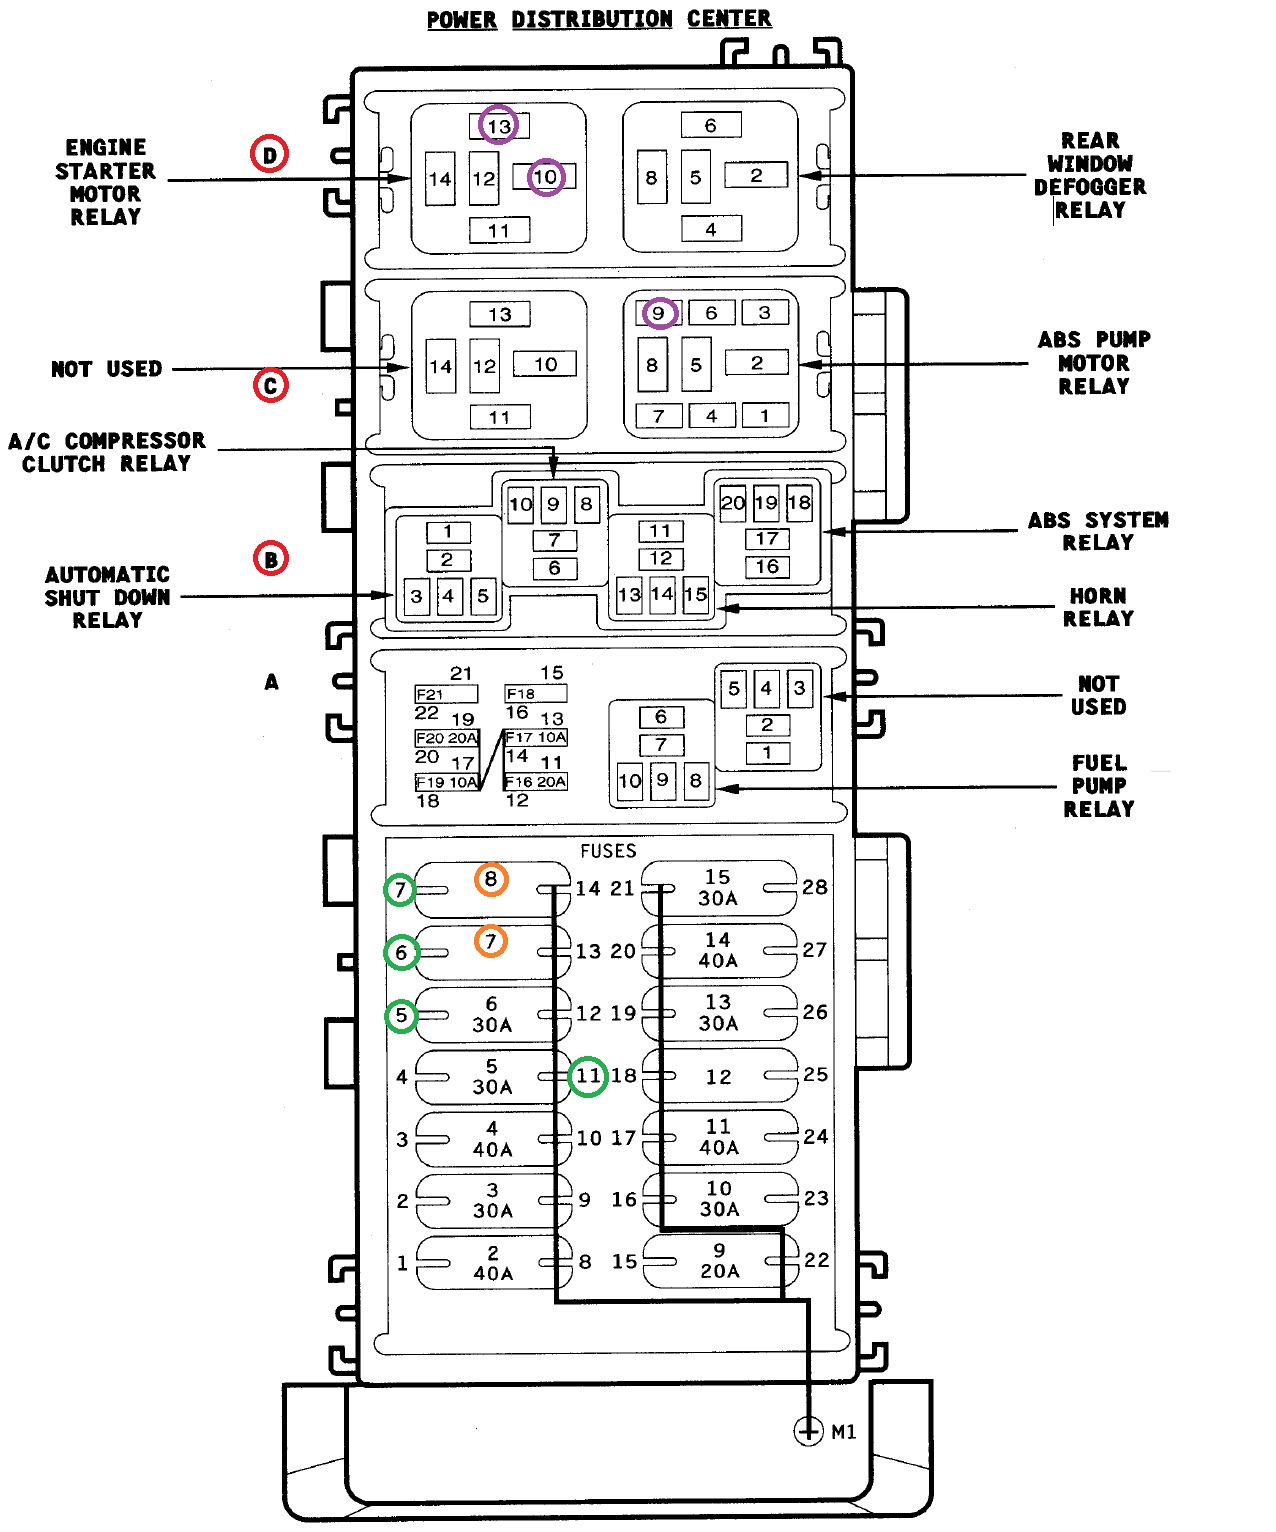 2015 Jeep Wrangler Wiring Diagram from hcpproperties.com